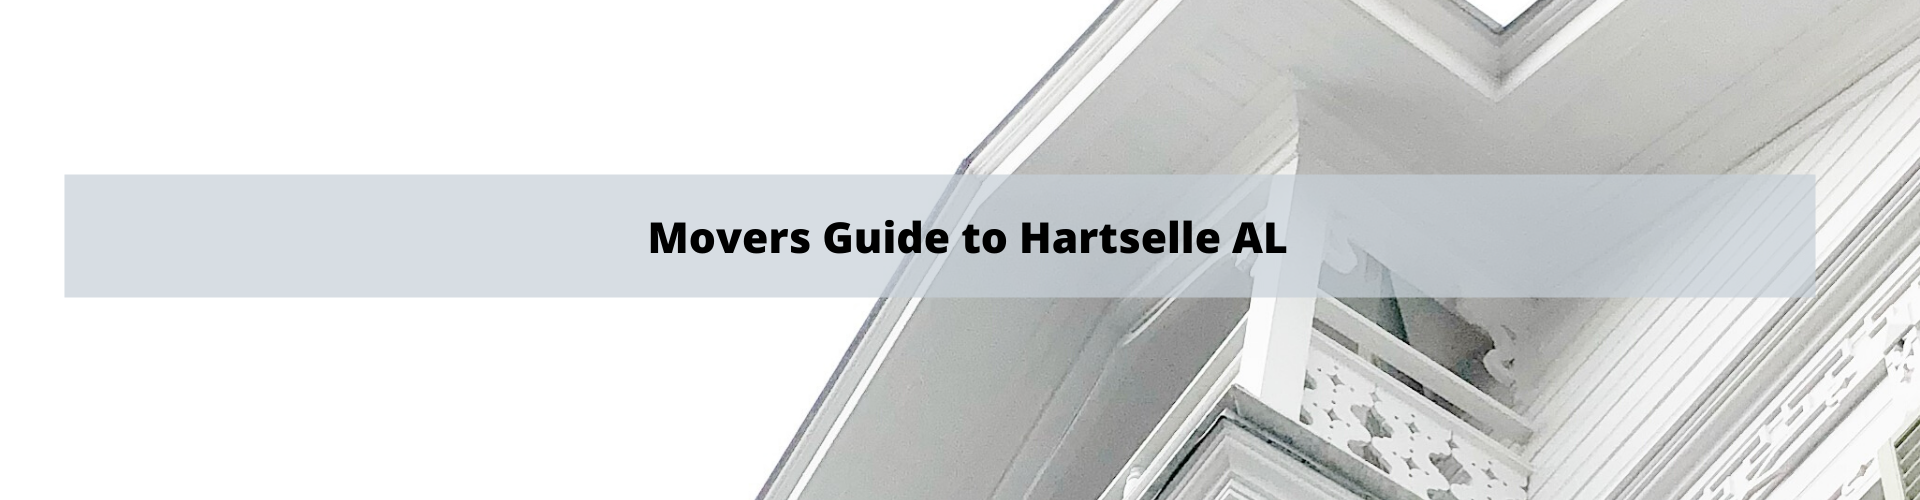 Movers Guide To Hartselle AL